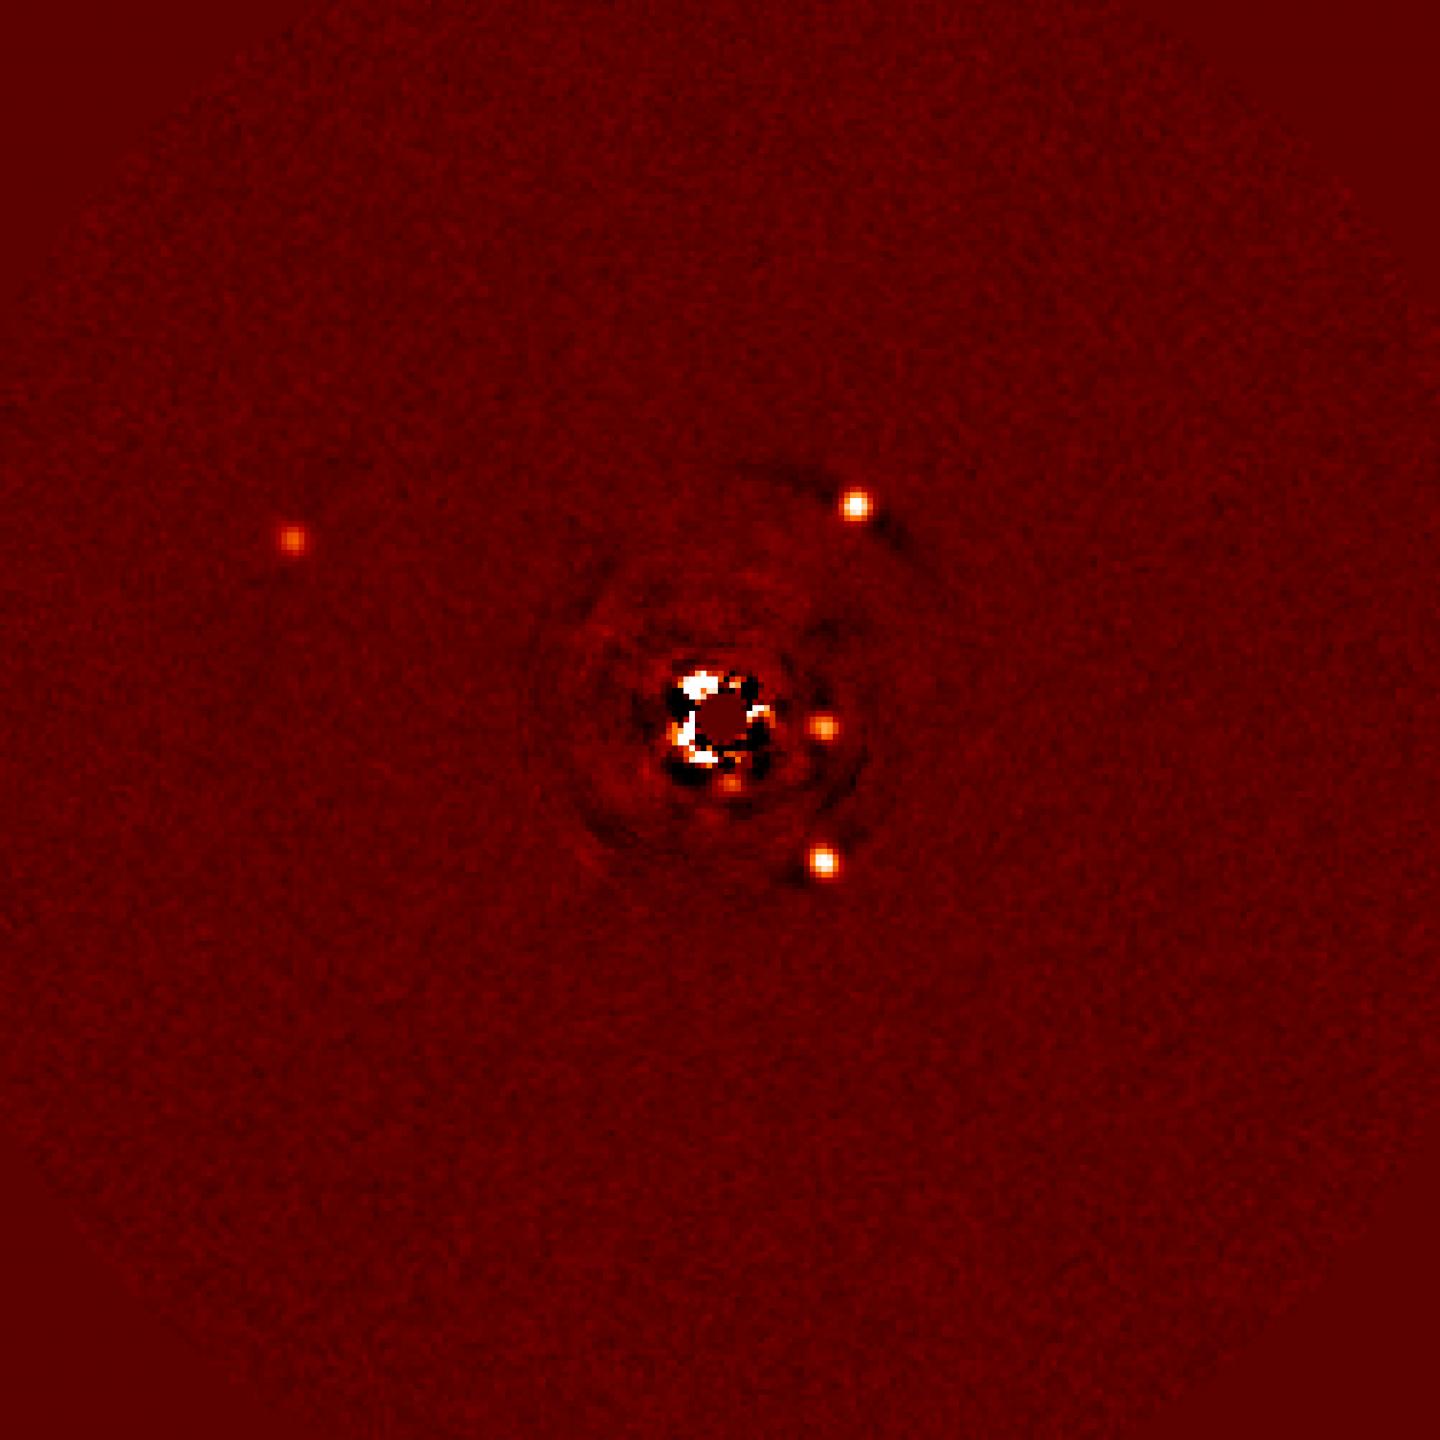 The Planetary System of HR 8799